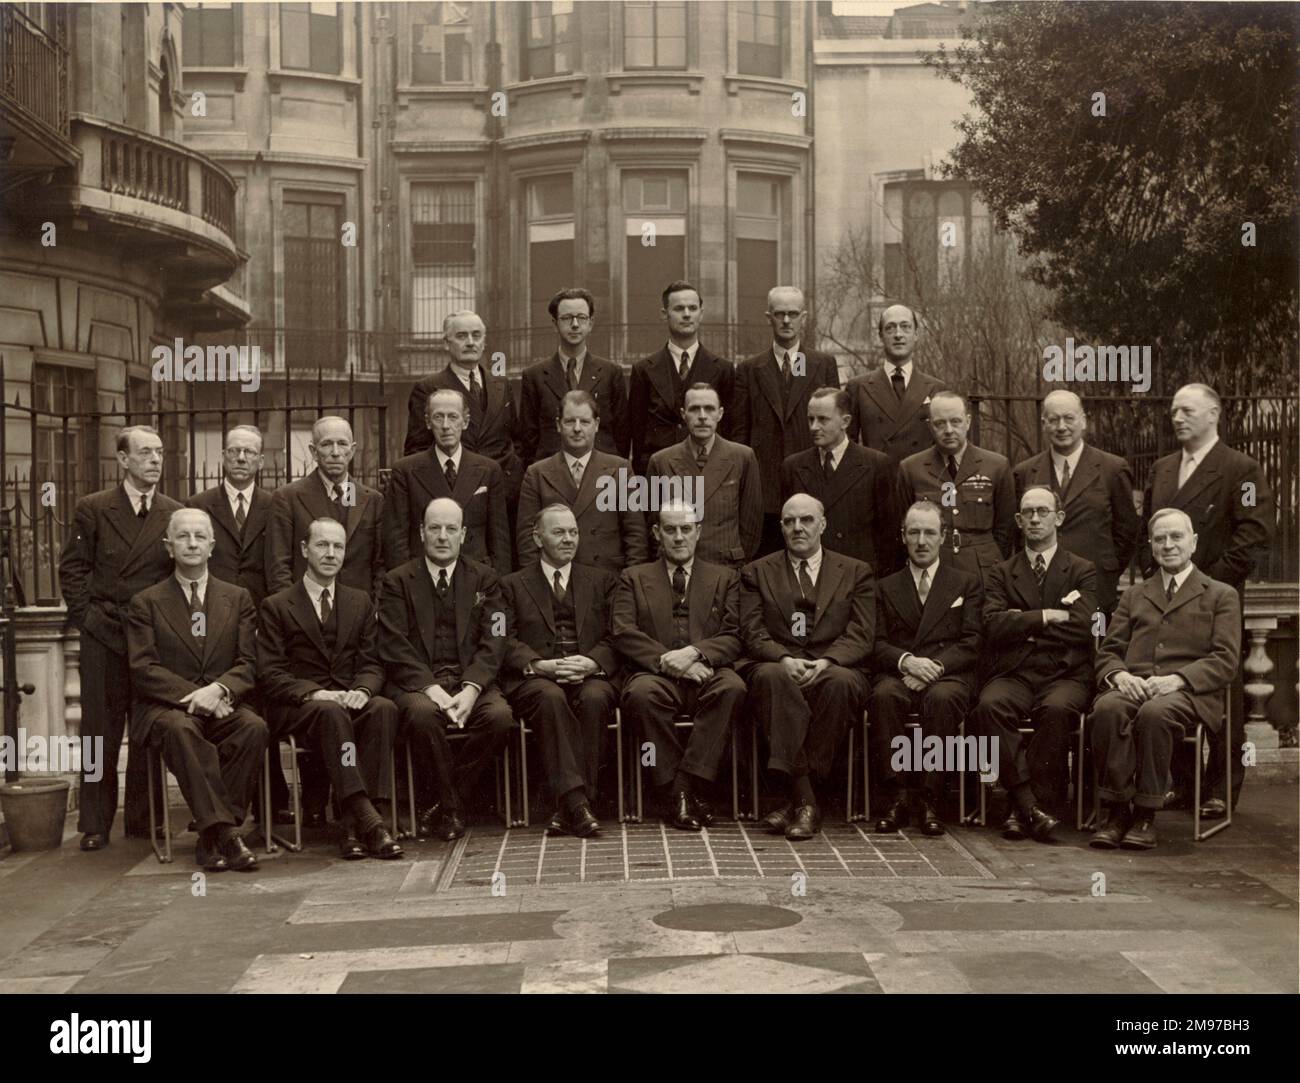 The Council of the Royal Aeronautical Society, 1943-1944, on the terrace behind No.4 Hamilton Place. From left, back row: A.G. Elliott, E.J.N. Archbold, R.S. Stafford, G.E. Petty and L.A. Wingfield. Middle row: Capt J.L. Pritchard, A.C. Brown, C.C. Walker, Sir Francis Shelmerdine, Major F.B. Halford, S.H. Evans, G.H. Dowty, F.R. Banks, W.C. Devereux and Capt A.G. Lamplugh. Front row: Major B.W. Shilson, Major R.H. Mayo, Lord Brabazon of Tara, A. Gouge, Sir A.H. Roy Fedden, R.K. Pierson, Sir Oliver Simmonds, N.E. Rowe and Griffith Brewer. Stock Photo